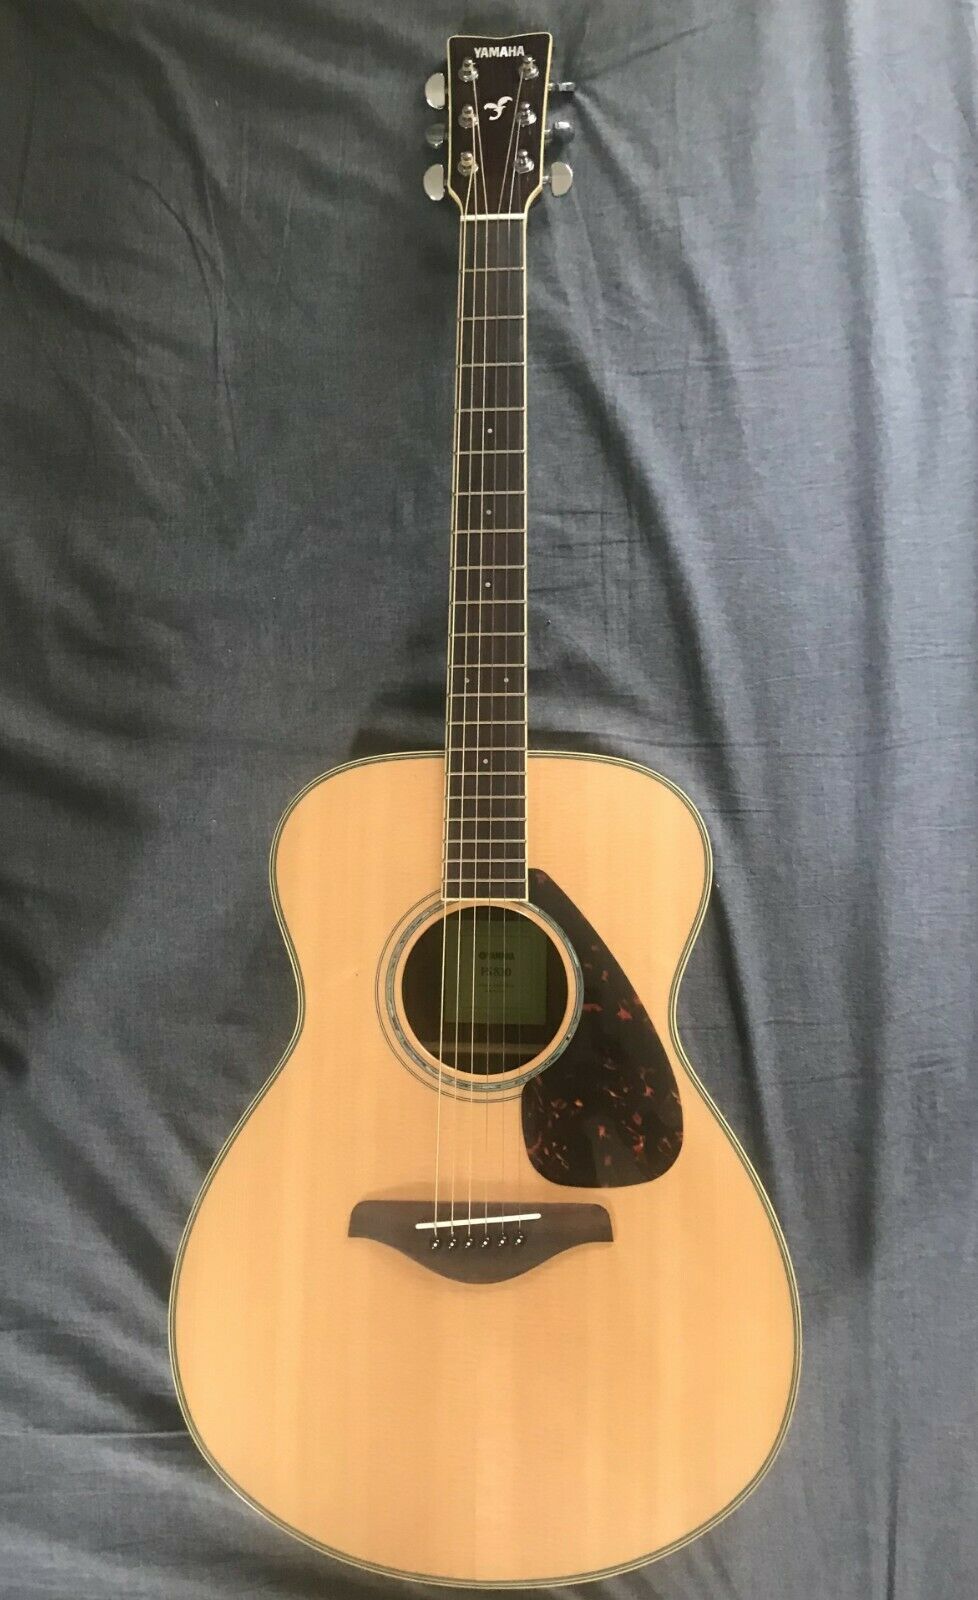 Yamaha FS830 Solid Top Small Body Acoustic Guitar, With CASE, Almost Never used